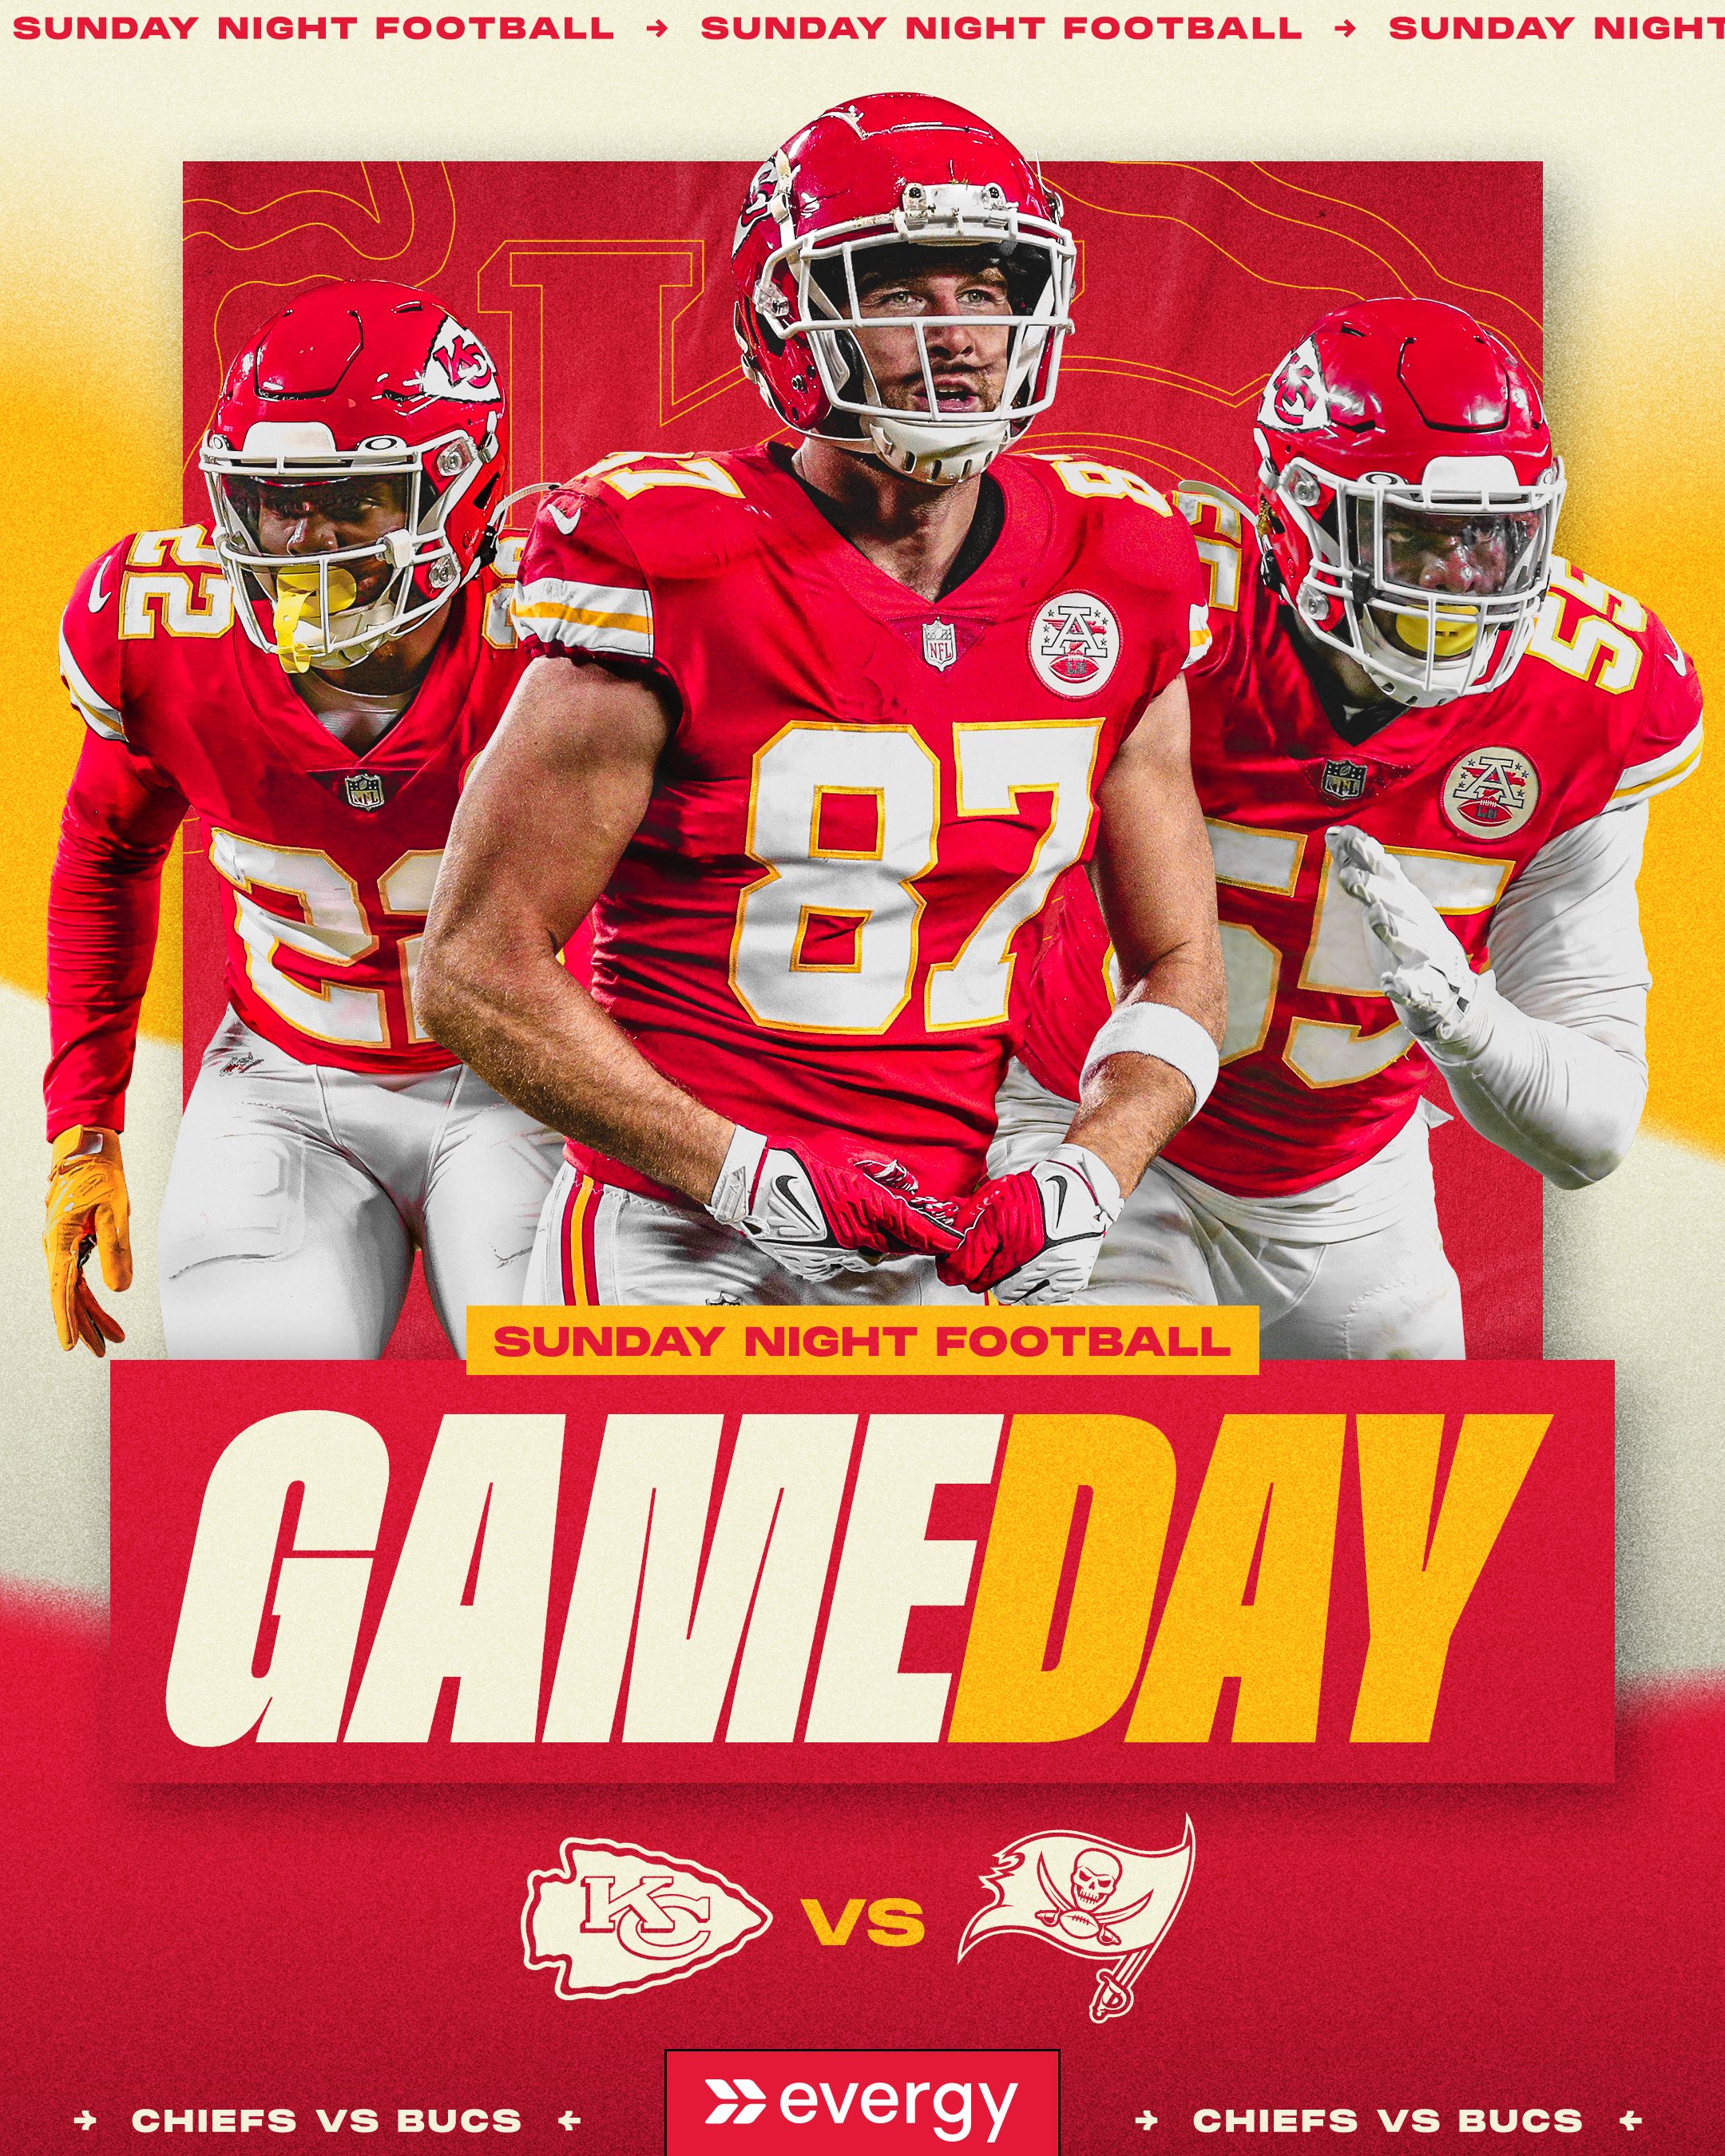 where can we watch the chiefs game today